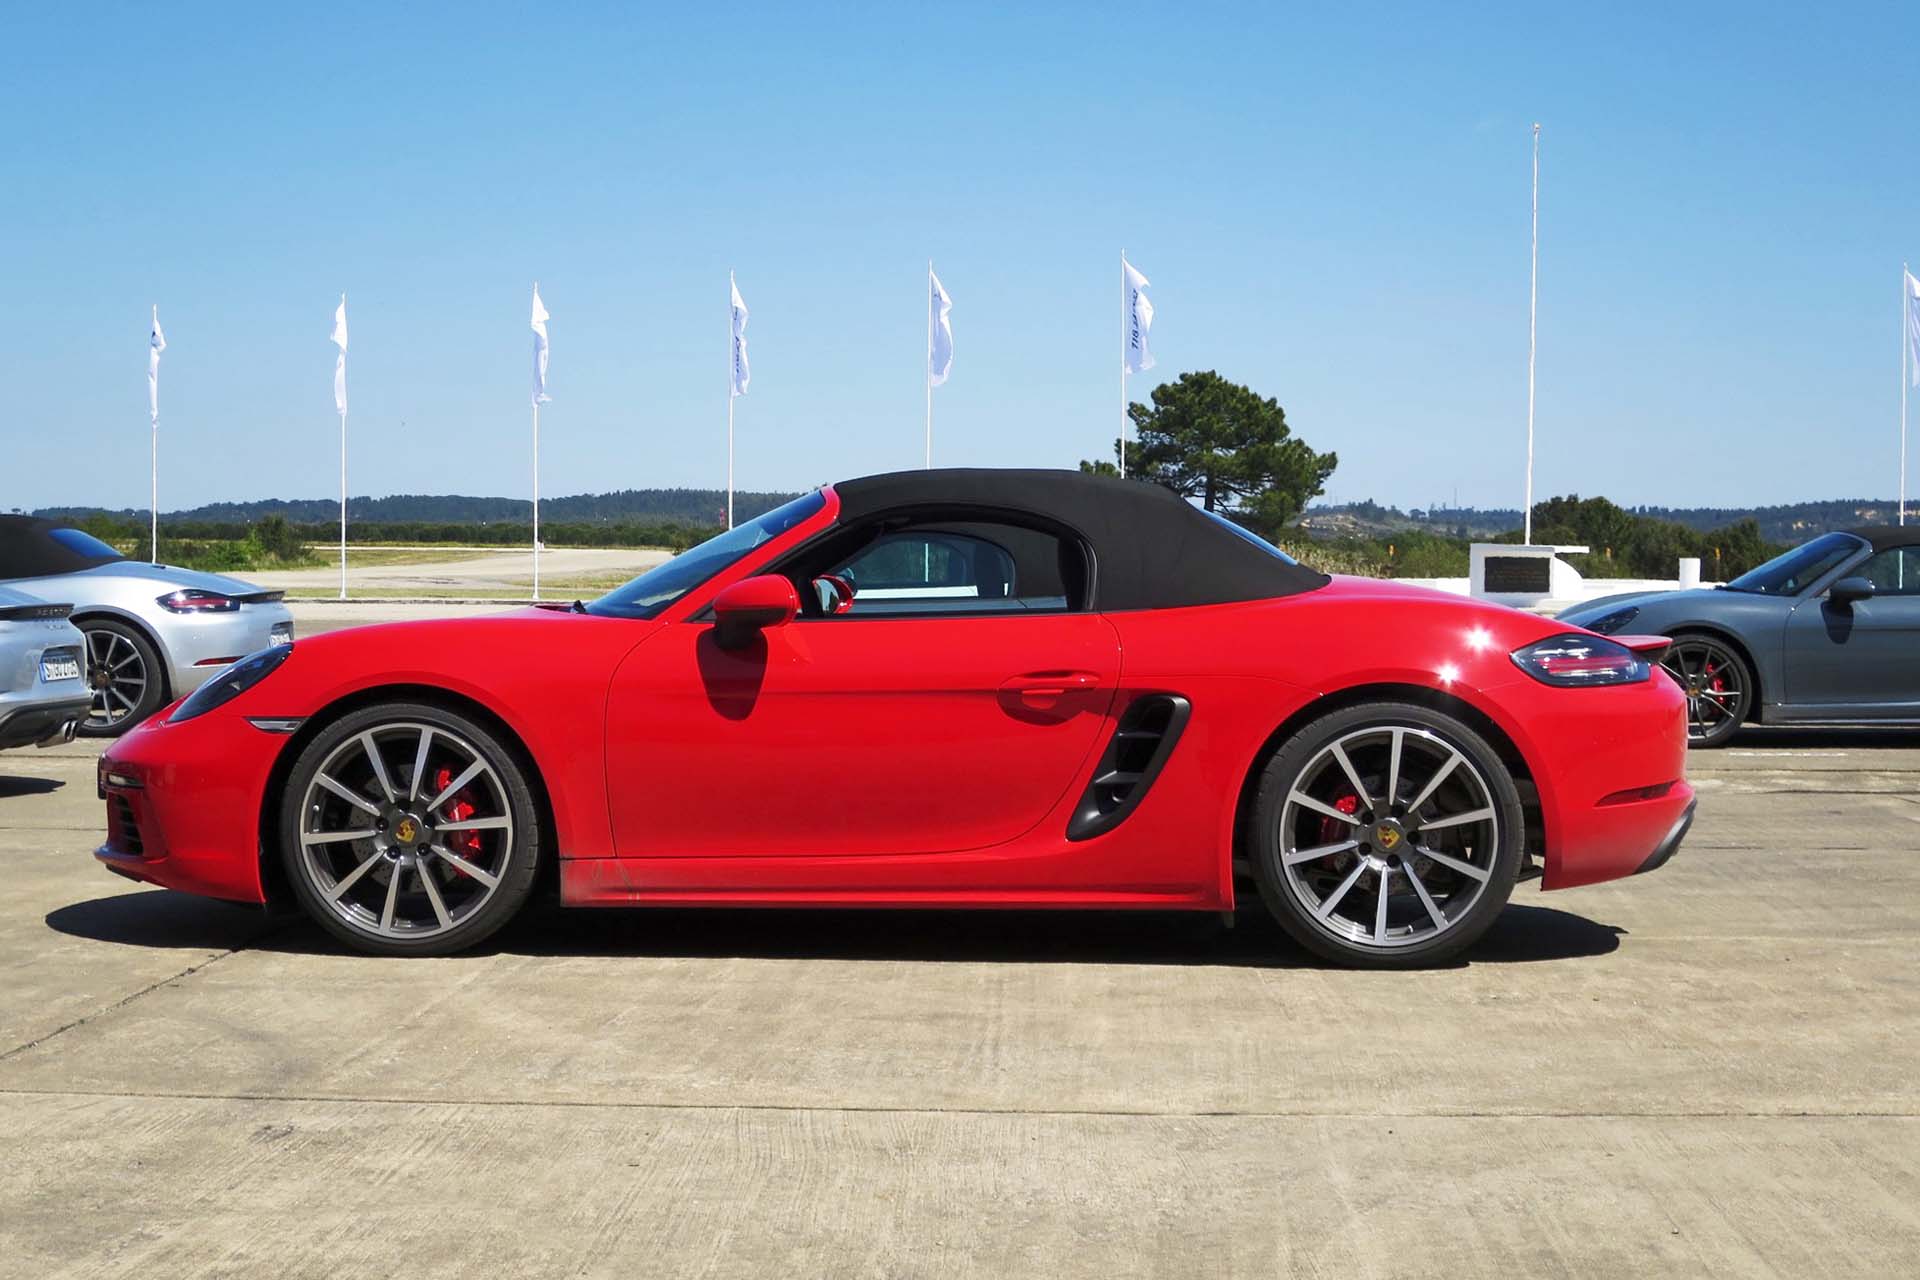 First Drive: 2017 Porsche 718 Boxster  Page 4 of 4 